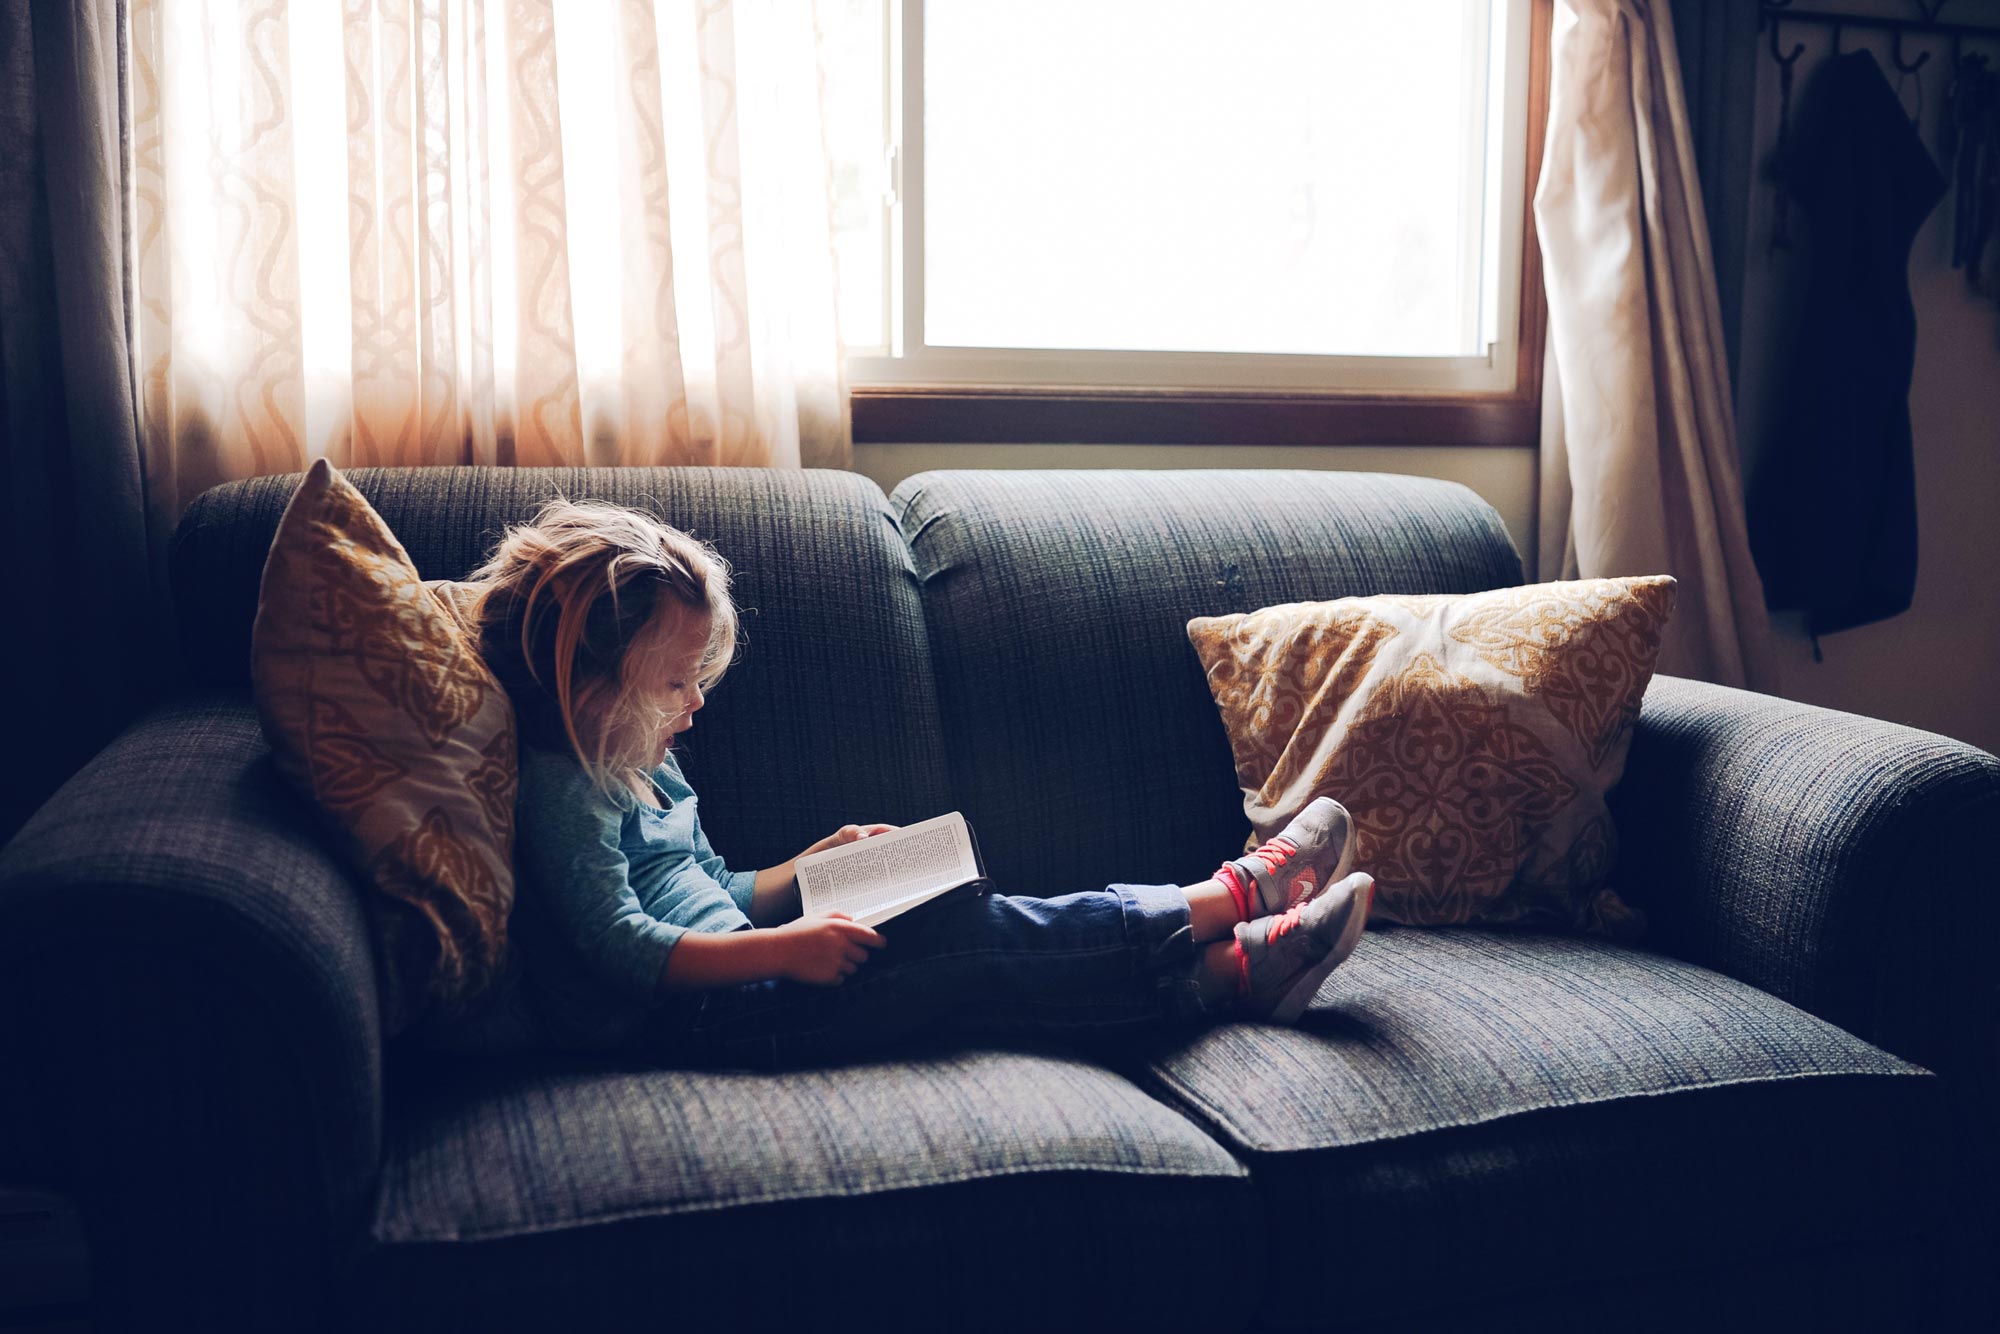 Little child sits on a couch reading a book